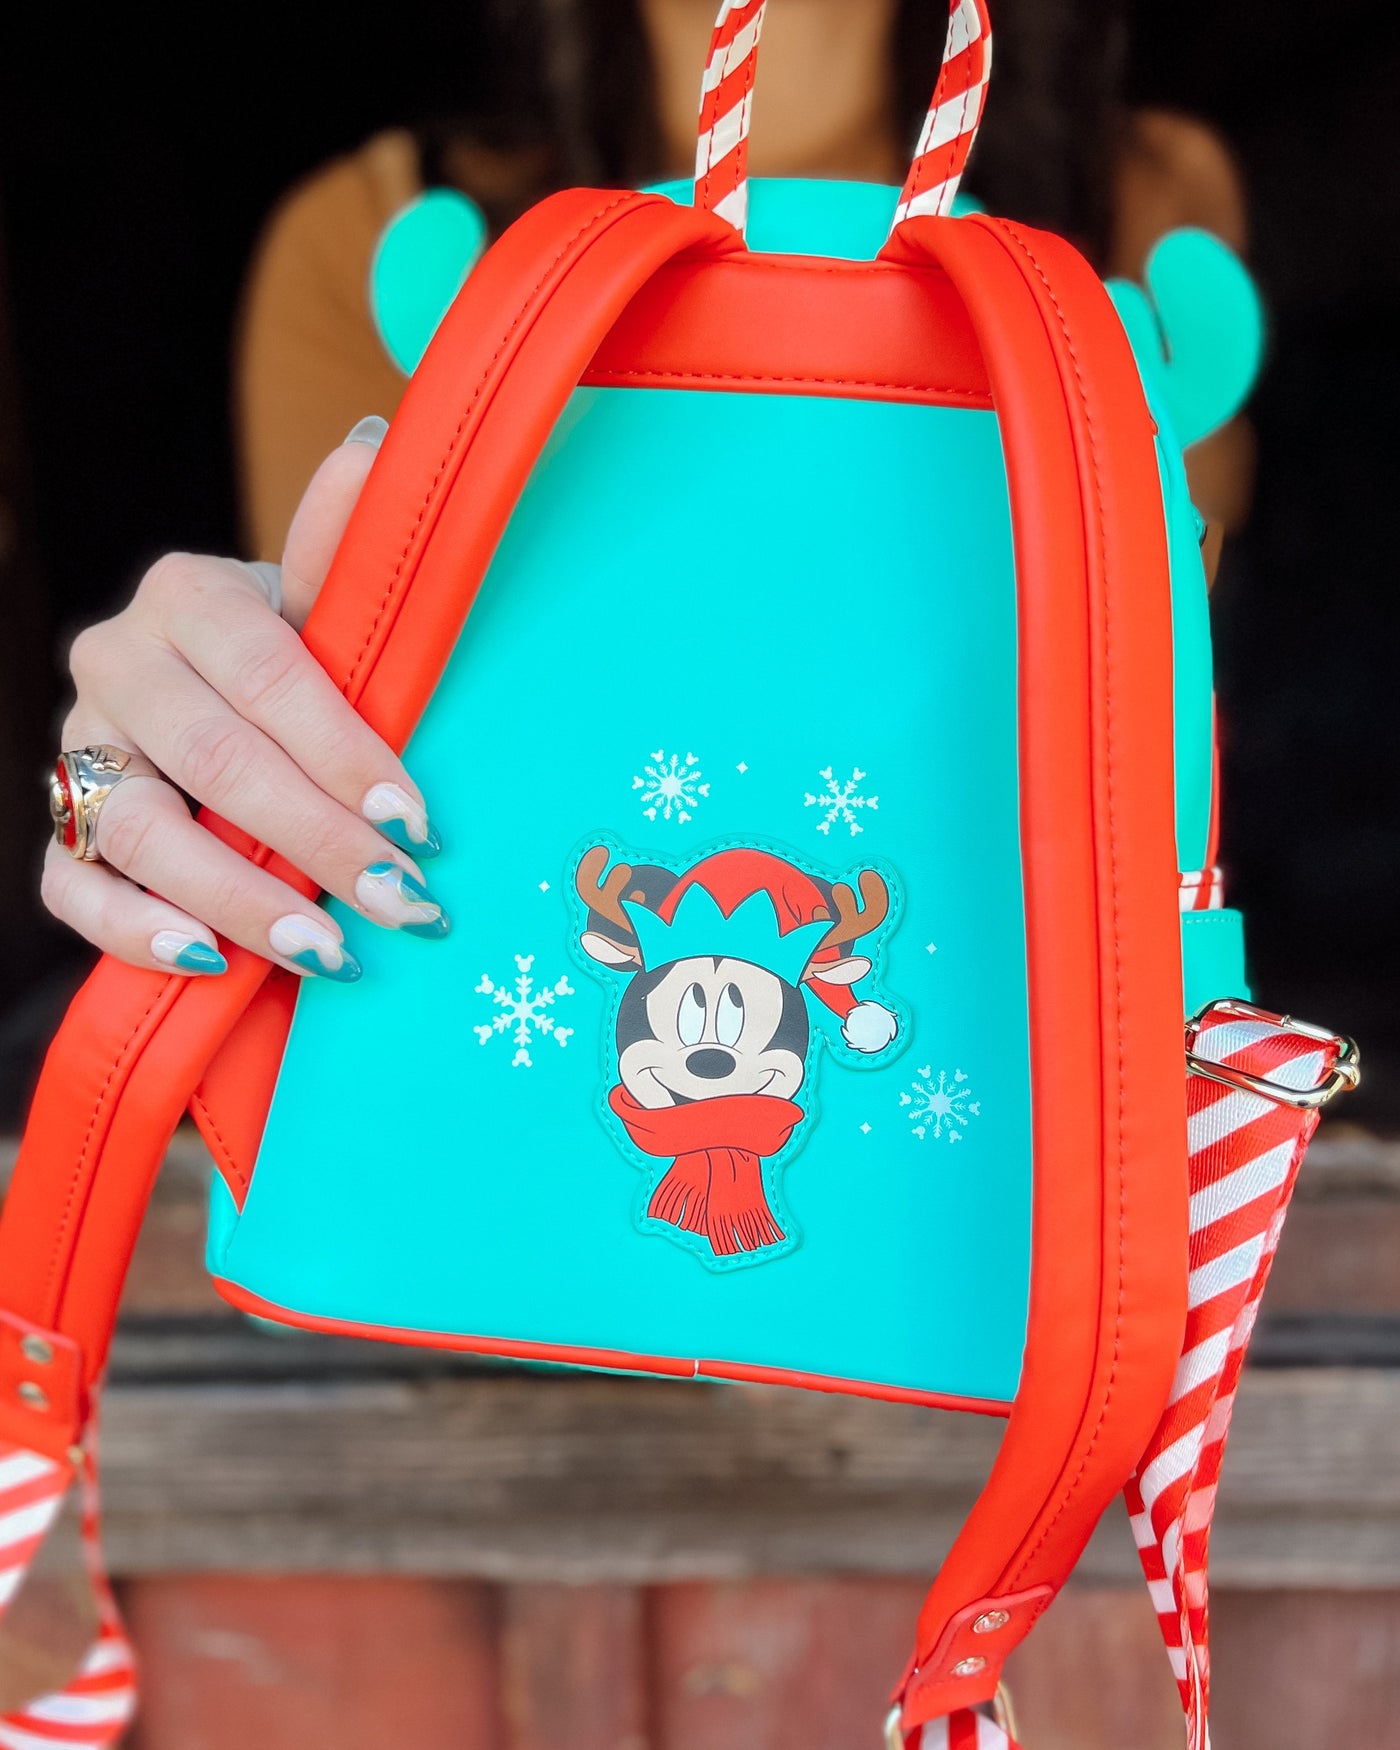 707 Street Exclusive - Loungefly Disney Light Up Mickey Mouse Reindeer Cosplay Mini Backpack - Loungefly mini backpack lifestyle image 03